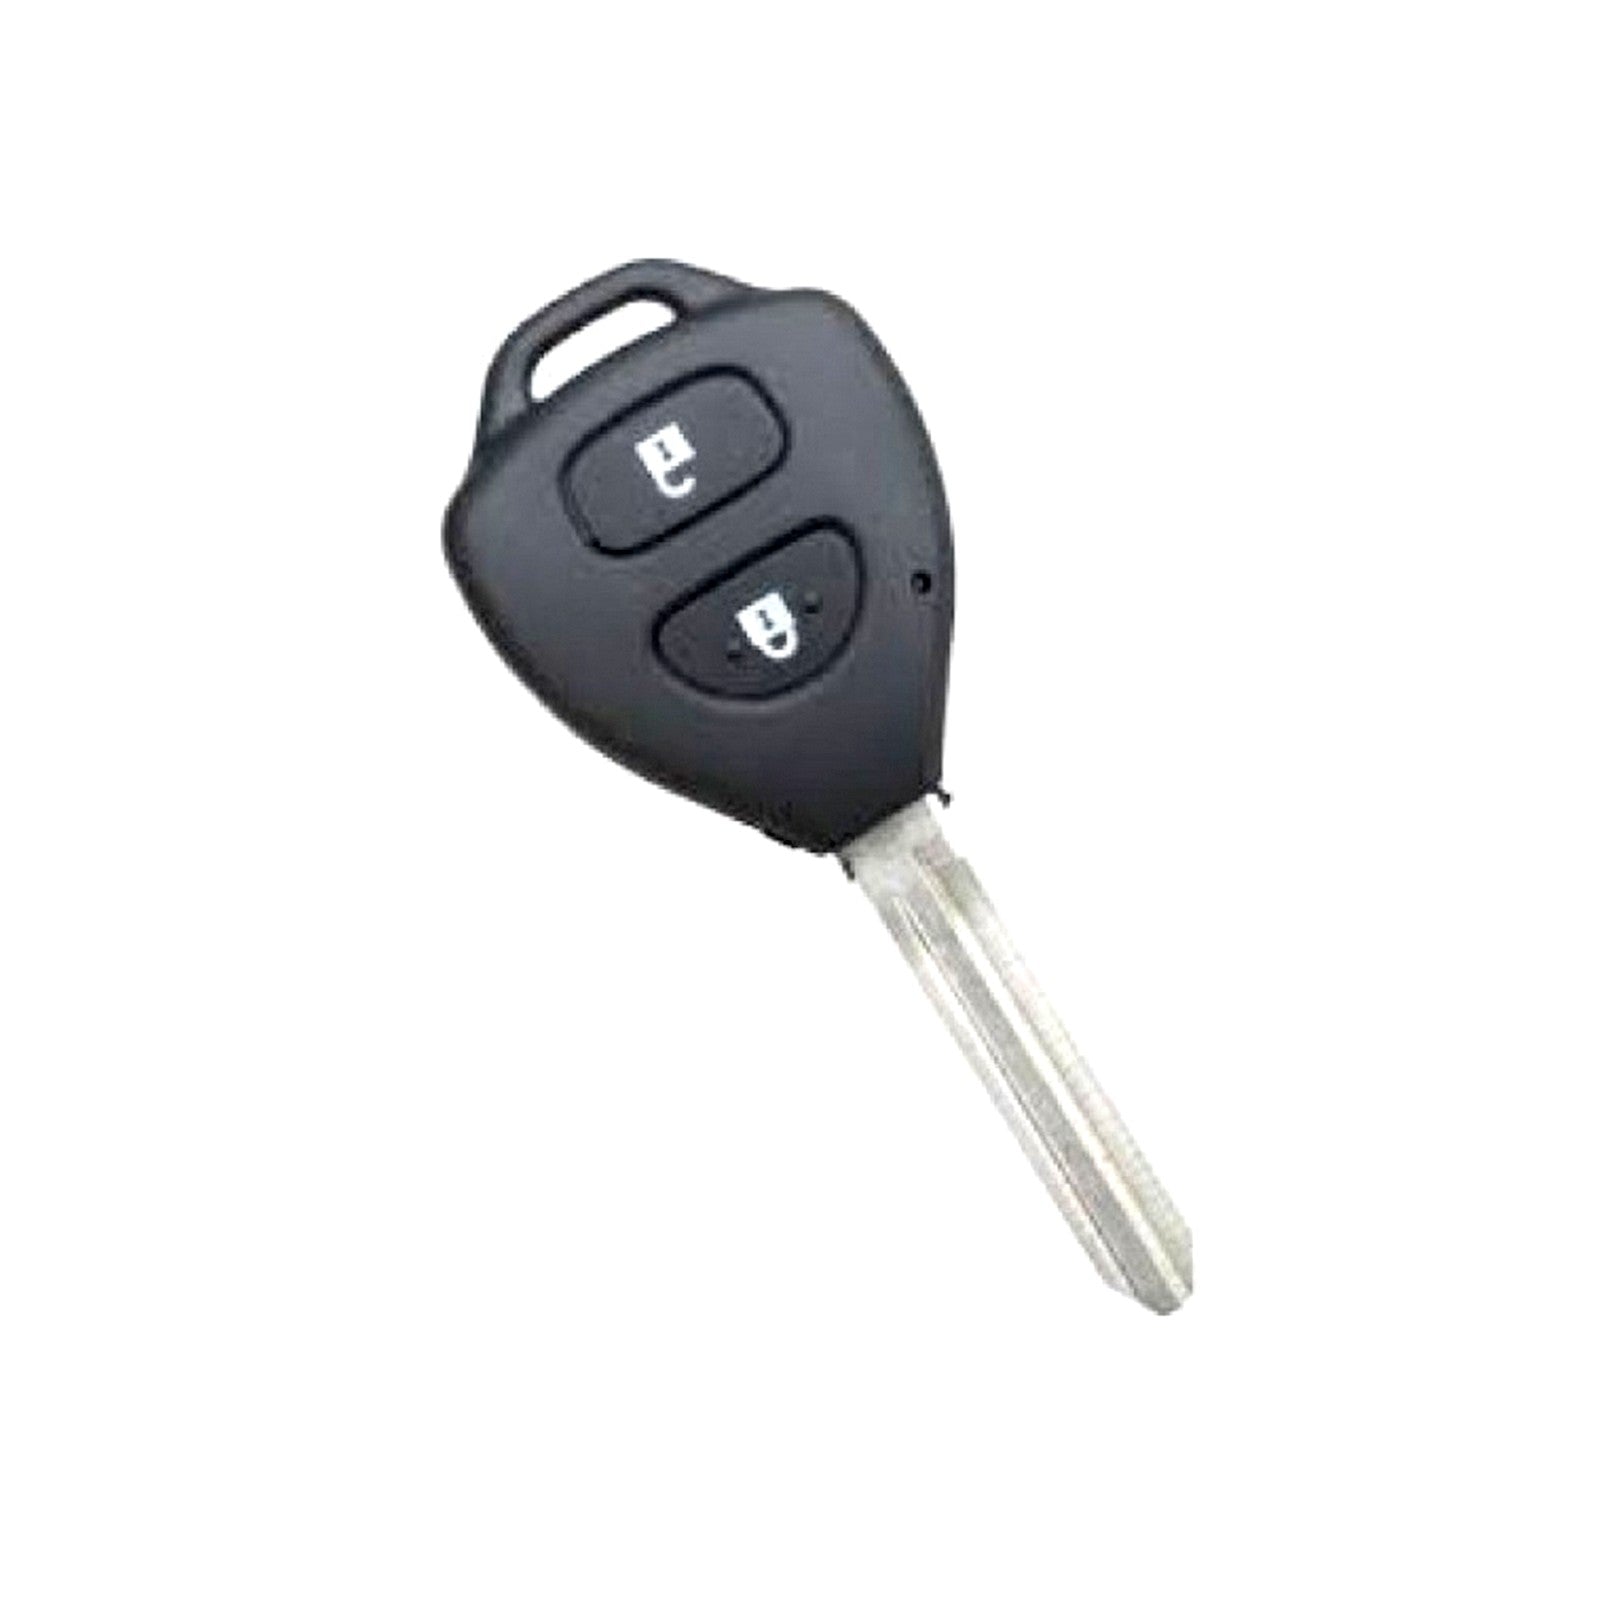 KEY COVER HARD SHALL, KEY COVER REPLACEMENT FOR TOYOTA VITZ